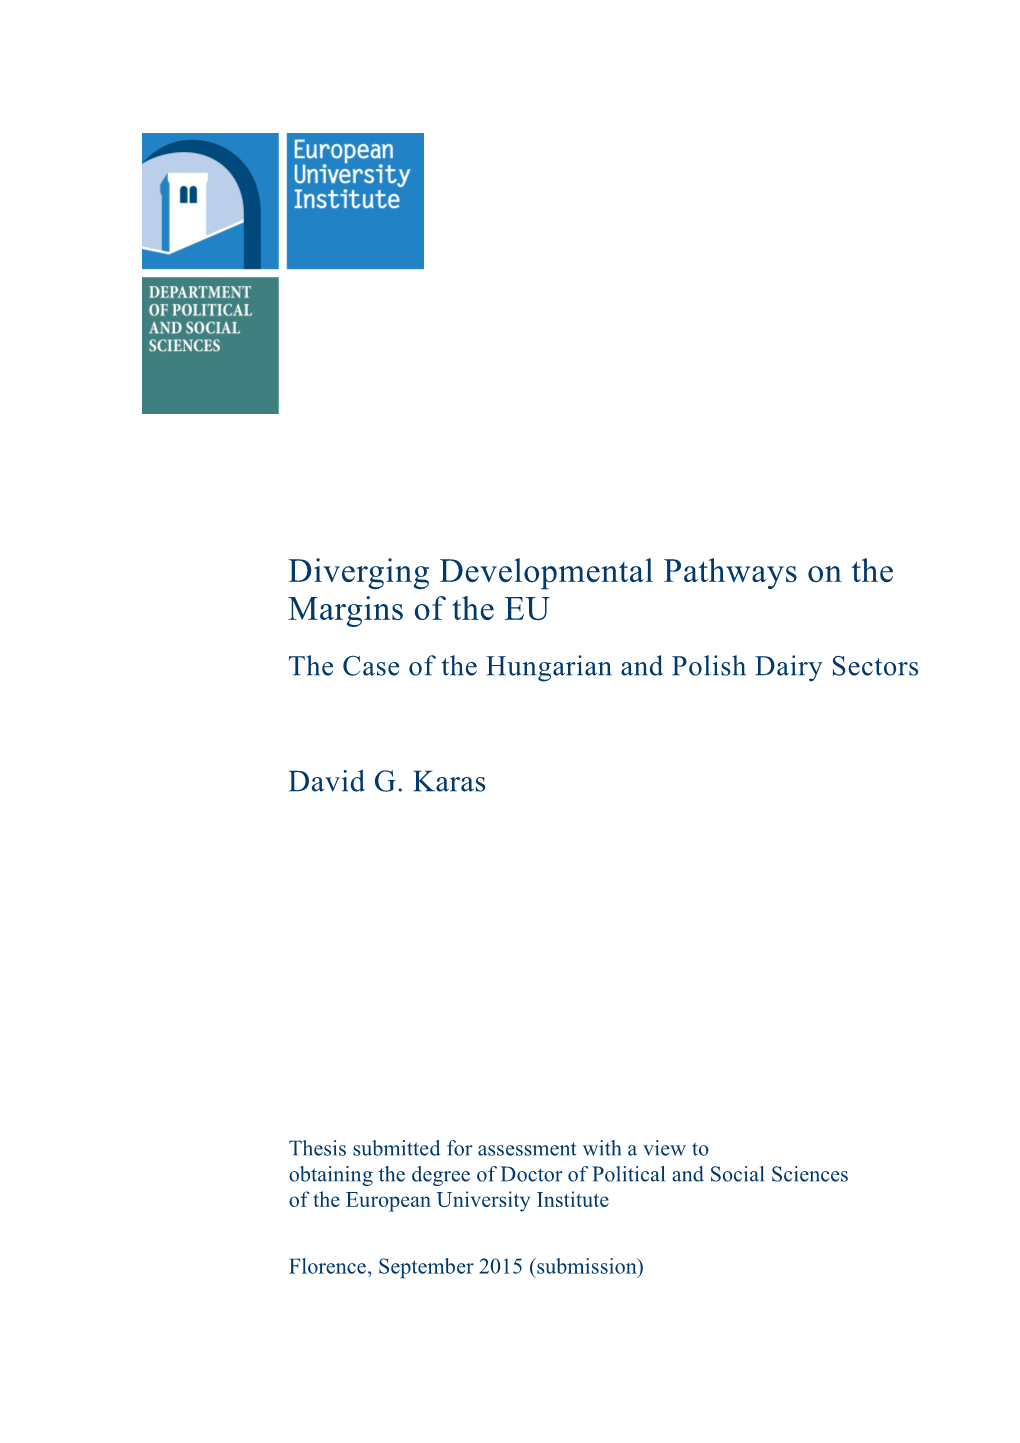 Diverging Developmental Pathways on the Margins of the EU the Case of the Hungarian and Polish Dairy Sectors